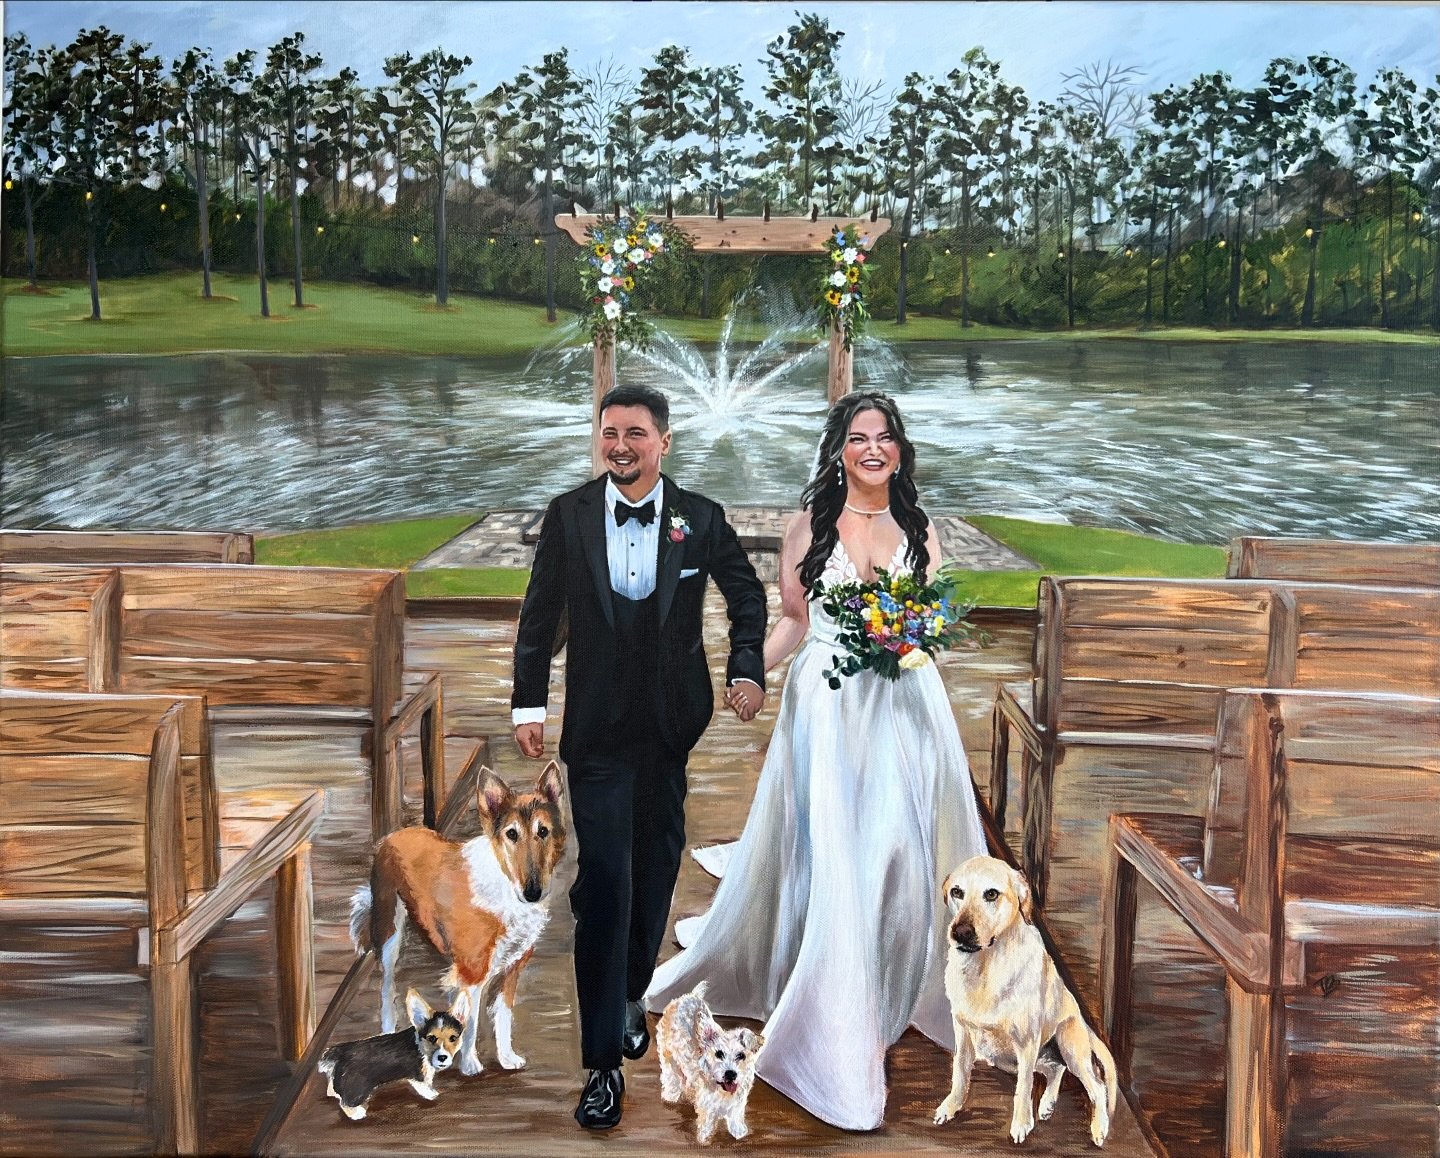 That just married joy! 🥰

Finished live wedding painting for The Lochers! 
24x30

#liveweddingpainting #liveweddingpainter